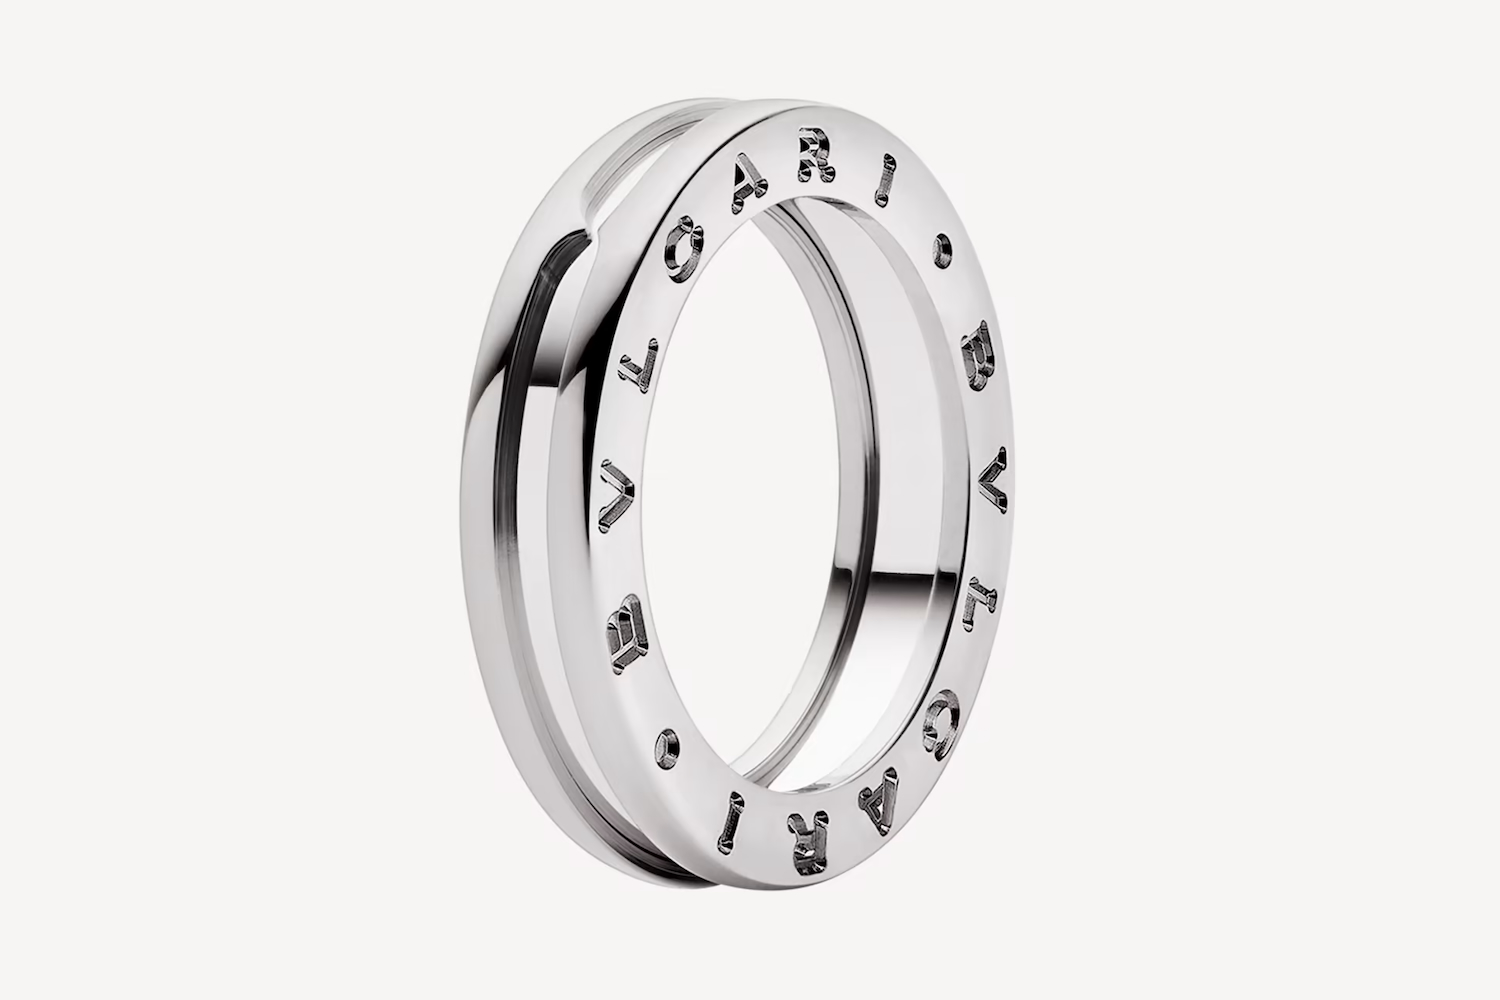 A promotional image of the Bvlgari B.Zero1 ring.